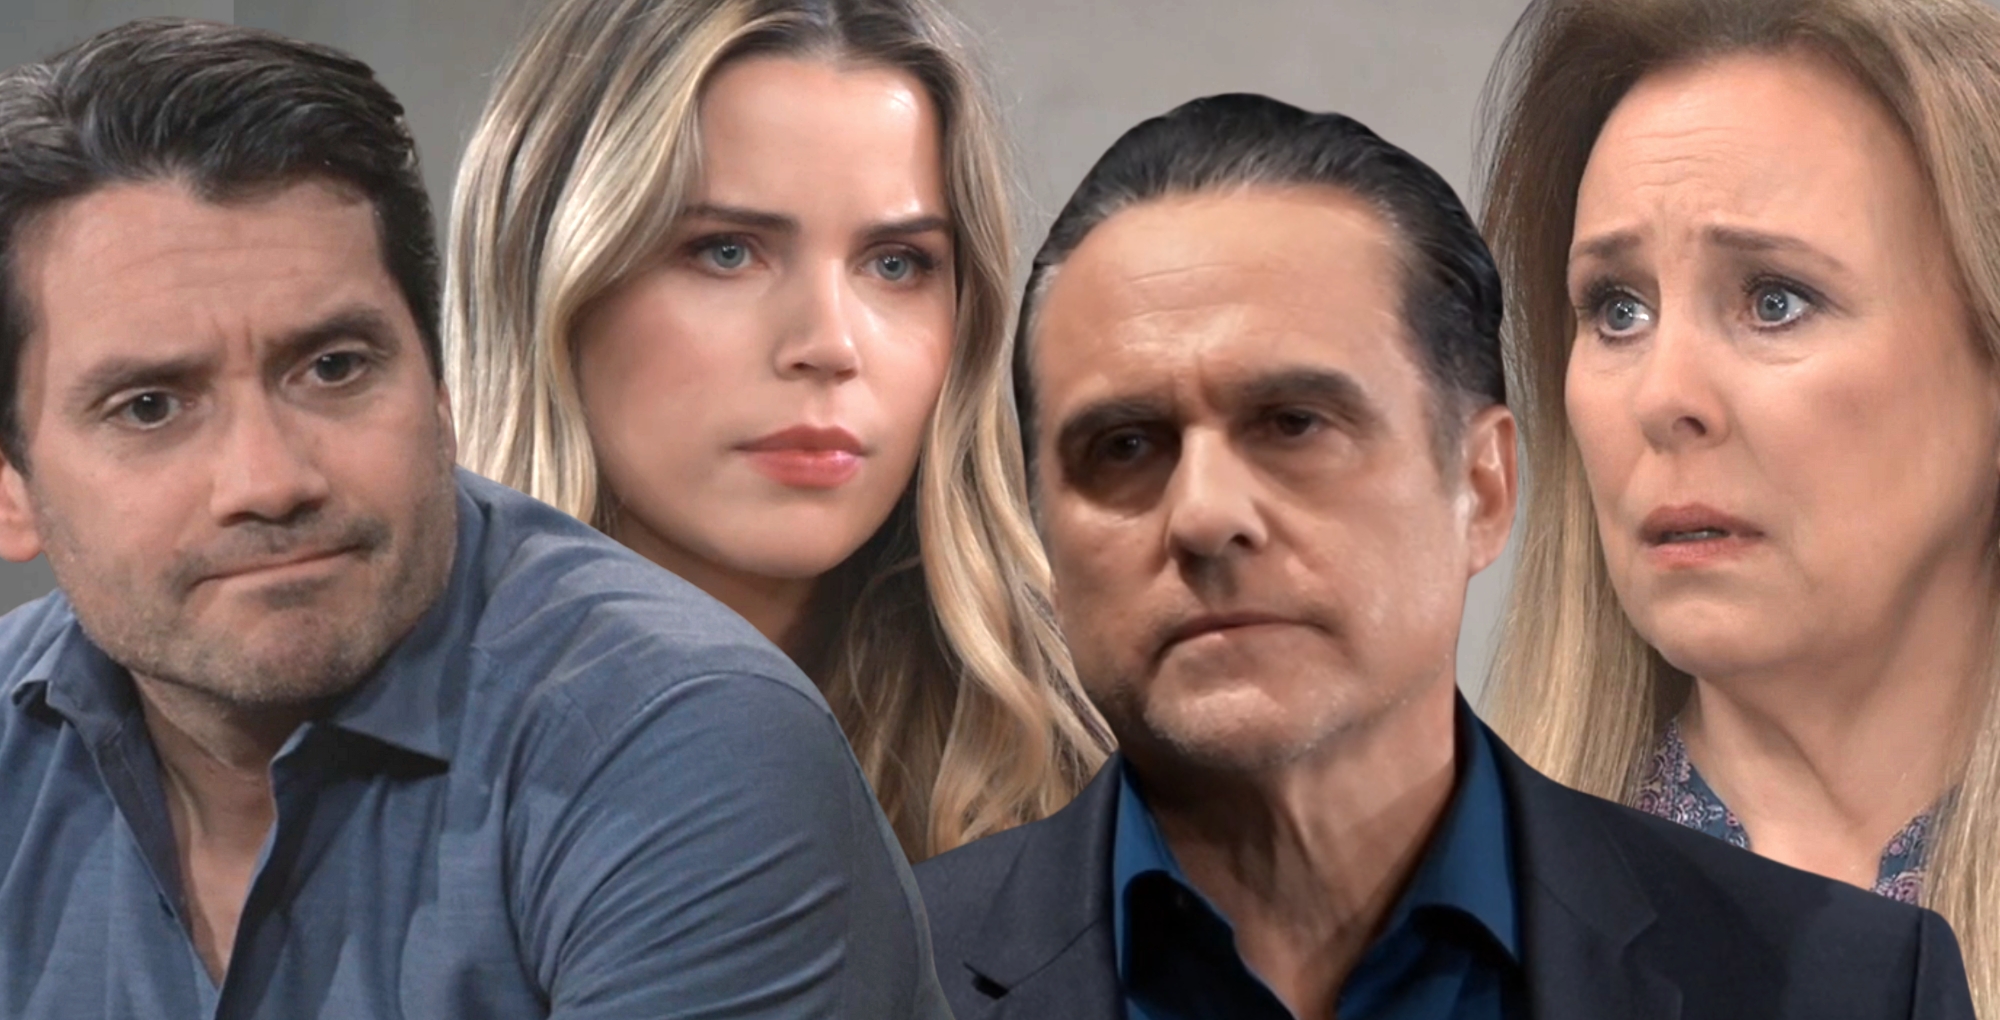 general hospital dante, sasha, sonny, and laura dealing with mental illness.